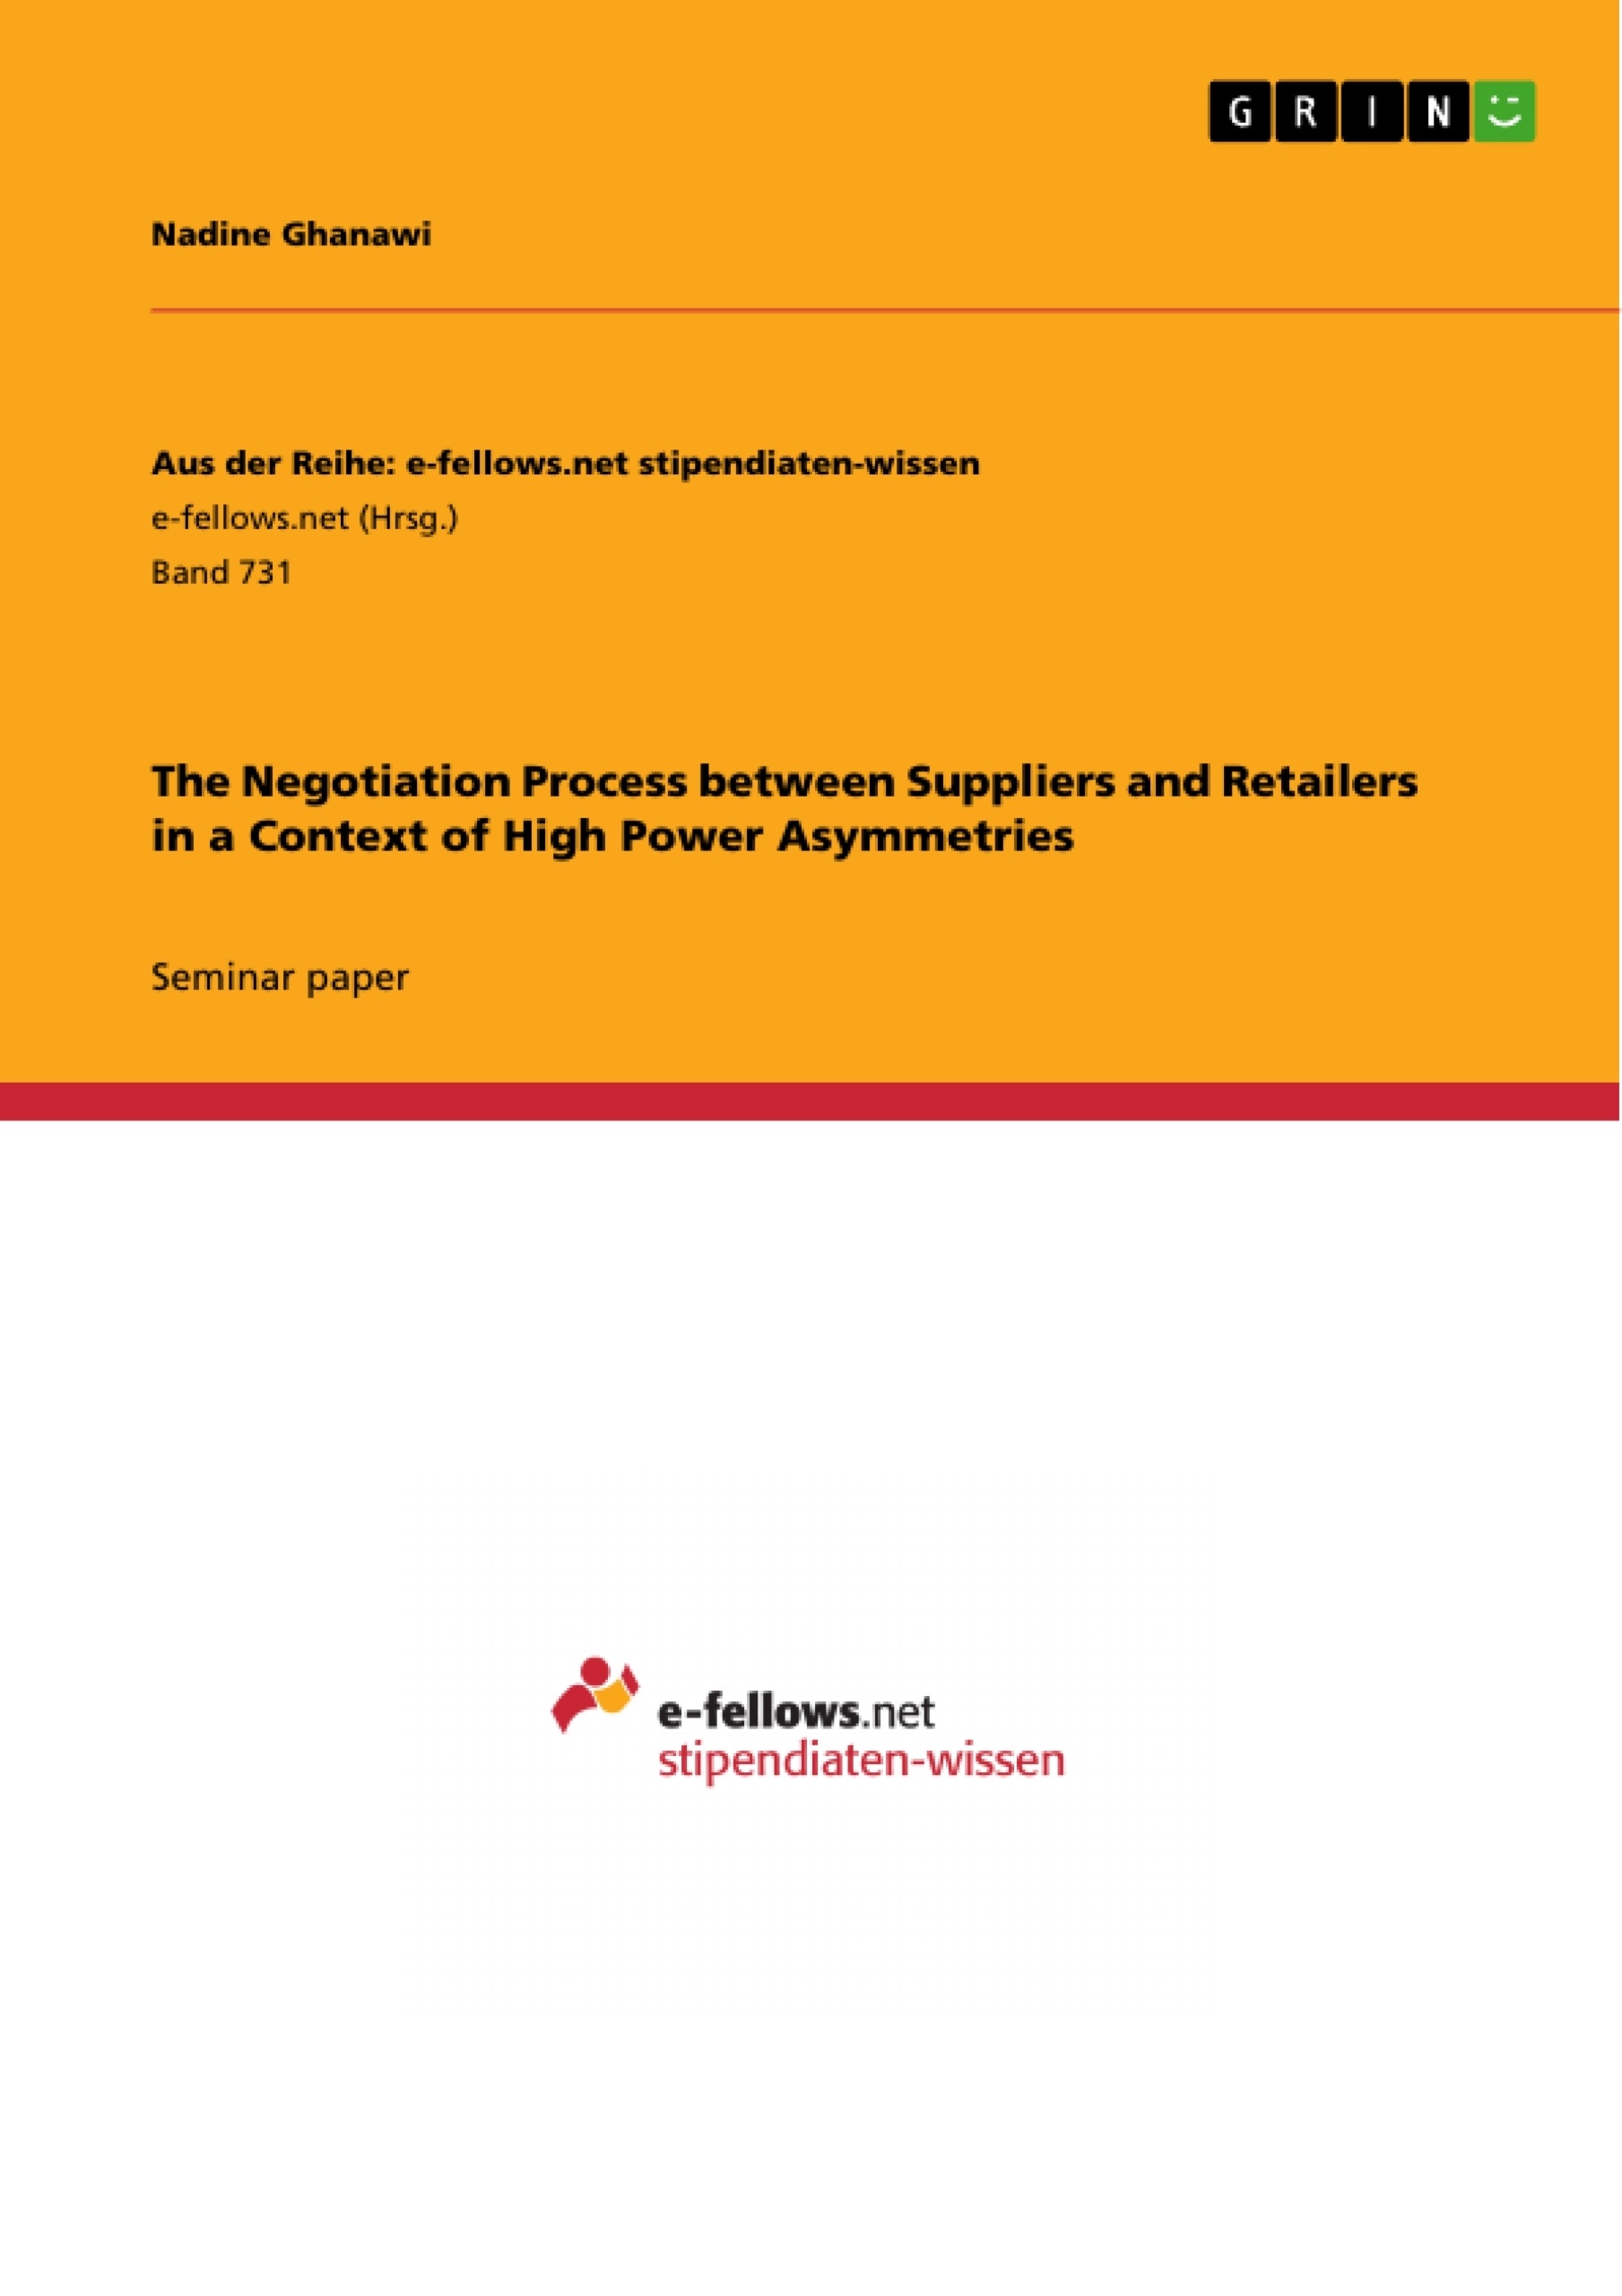 Título: The Negotiation Process between Suppliers and Retailers in a Context of High Power Asymmetries